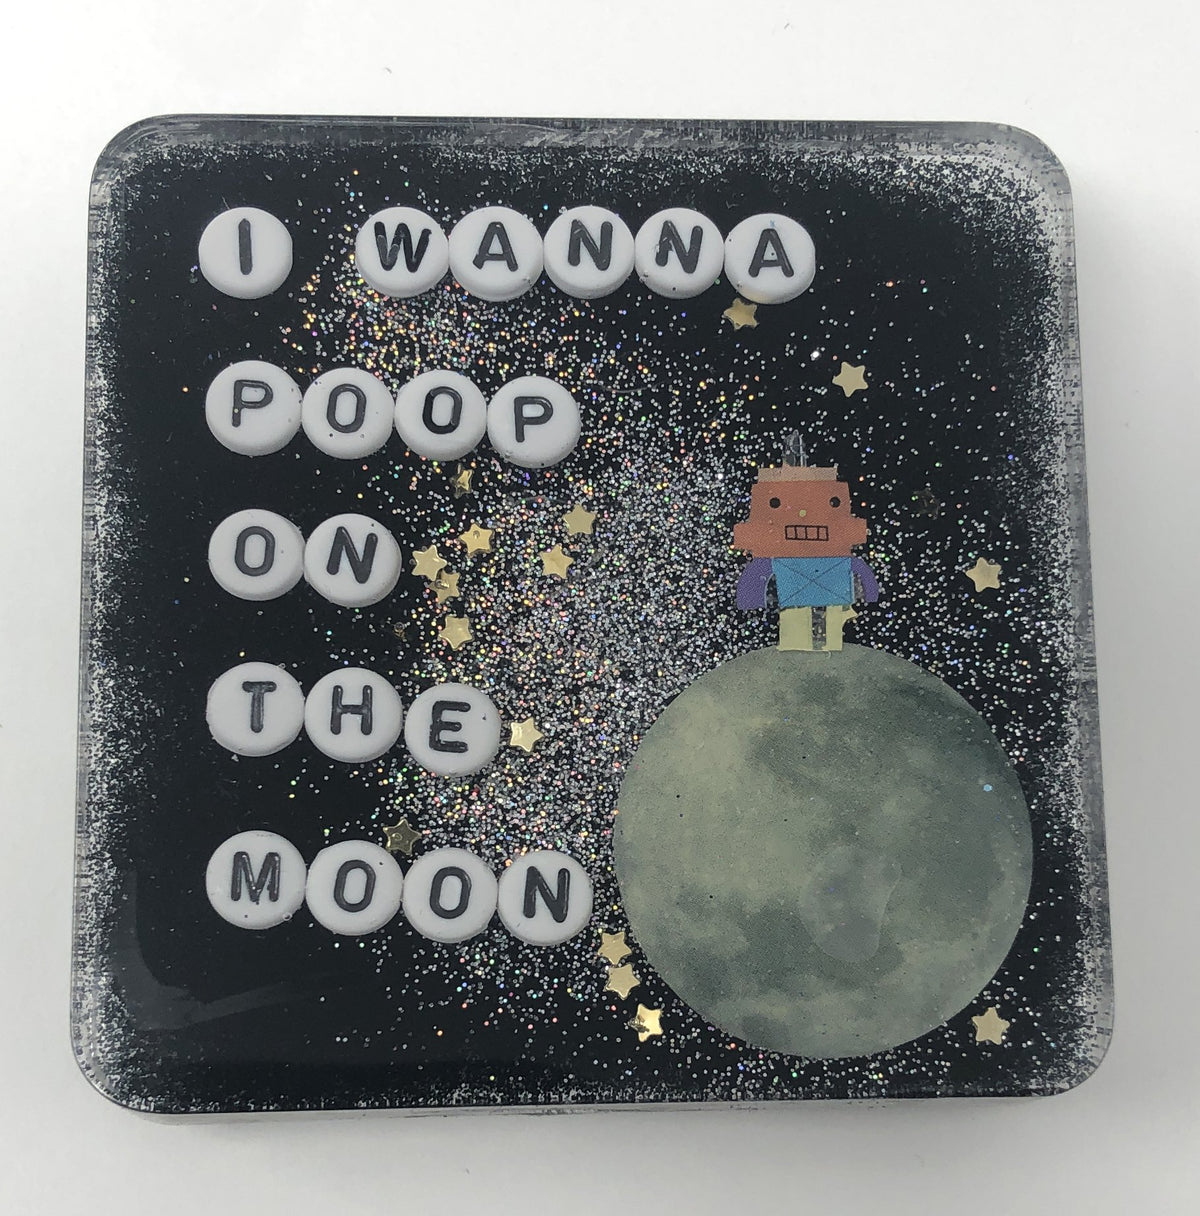 I Wanna Poop On The Moon - Shower Art - READY TO SHIP